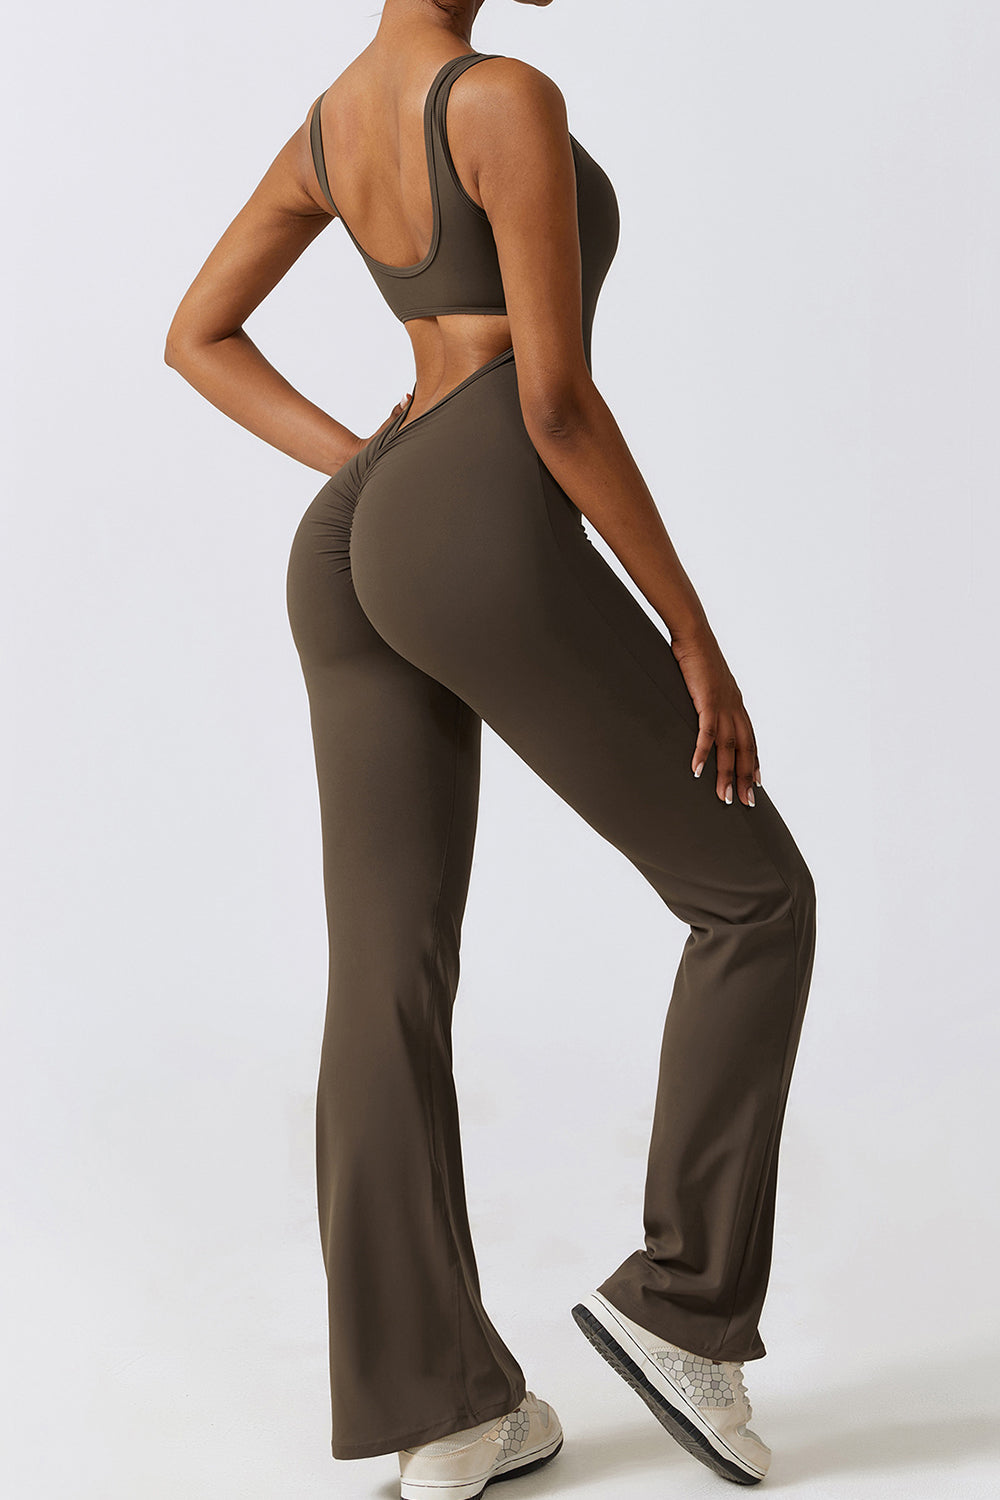 Sunset and Swim  Cutout Ruched Bootcut Sleeveless Active Jumpsuit  Sunset and Swim   